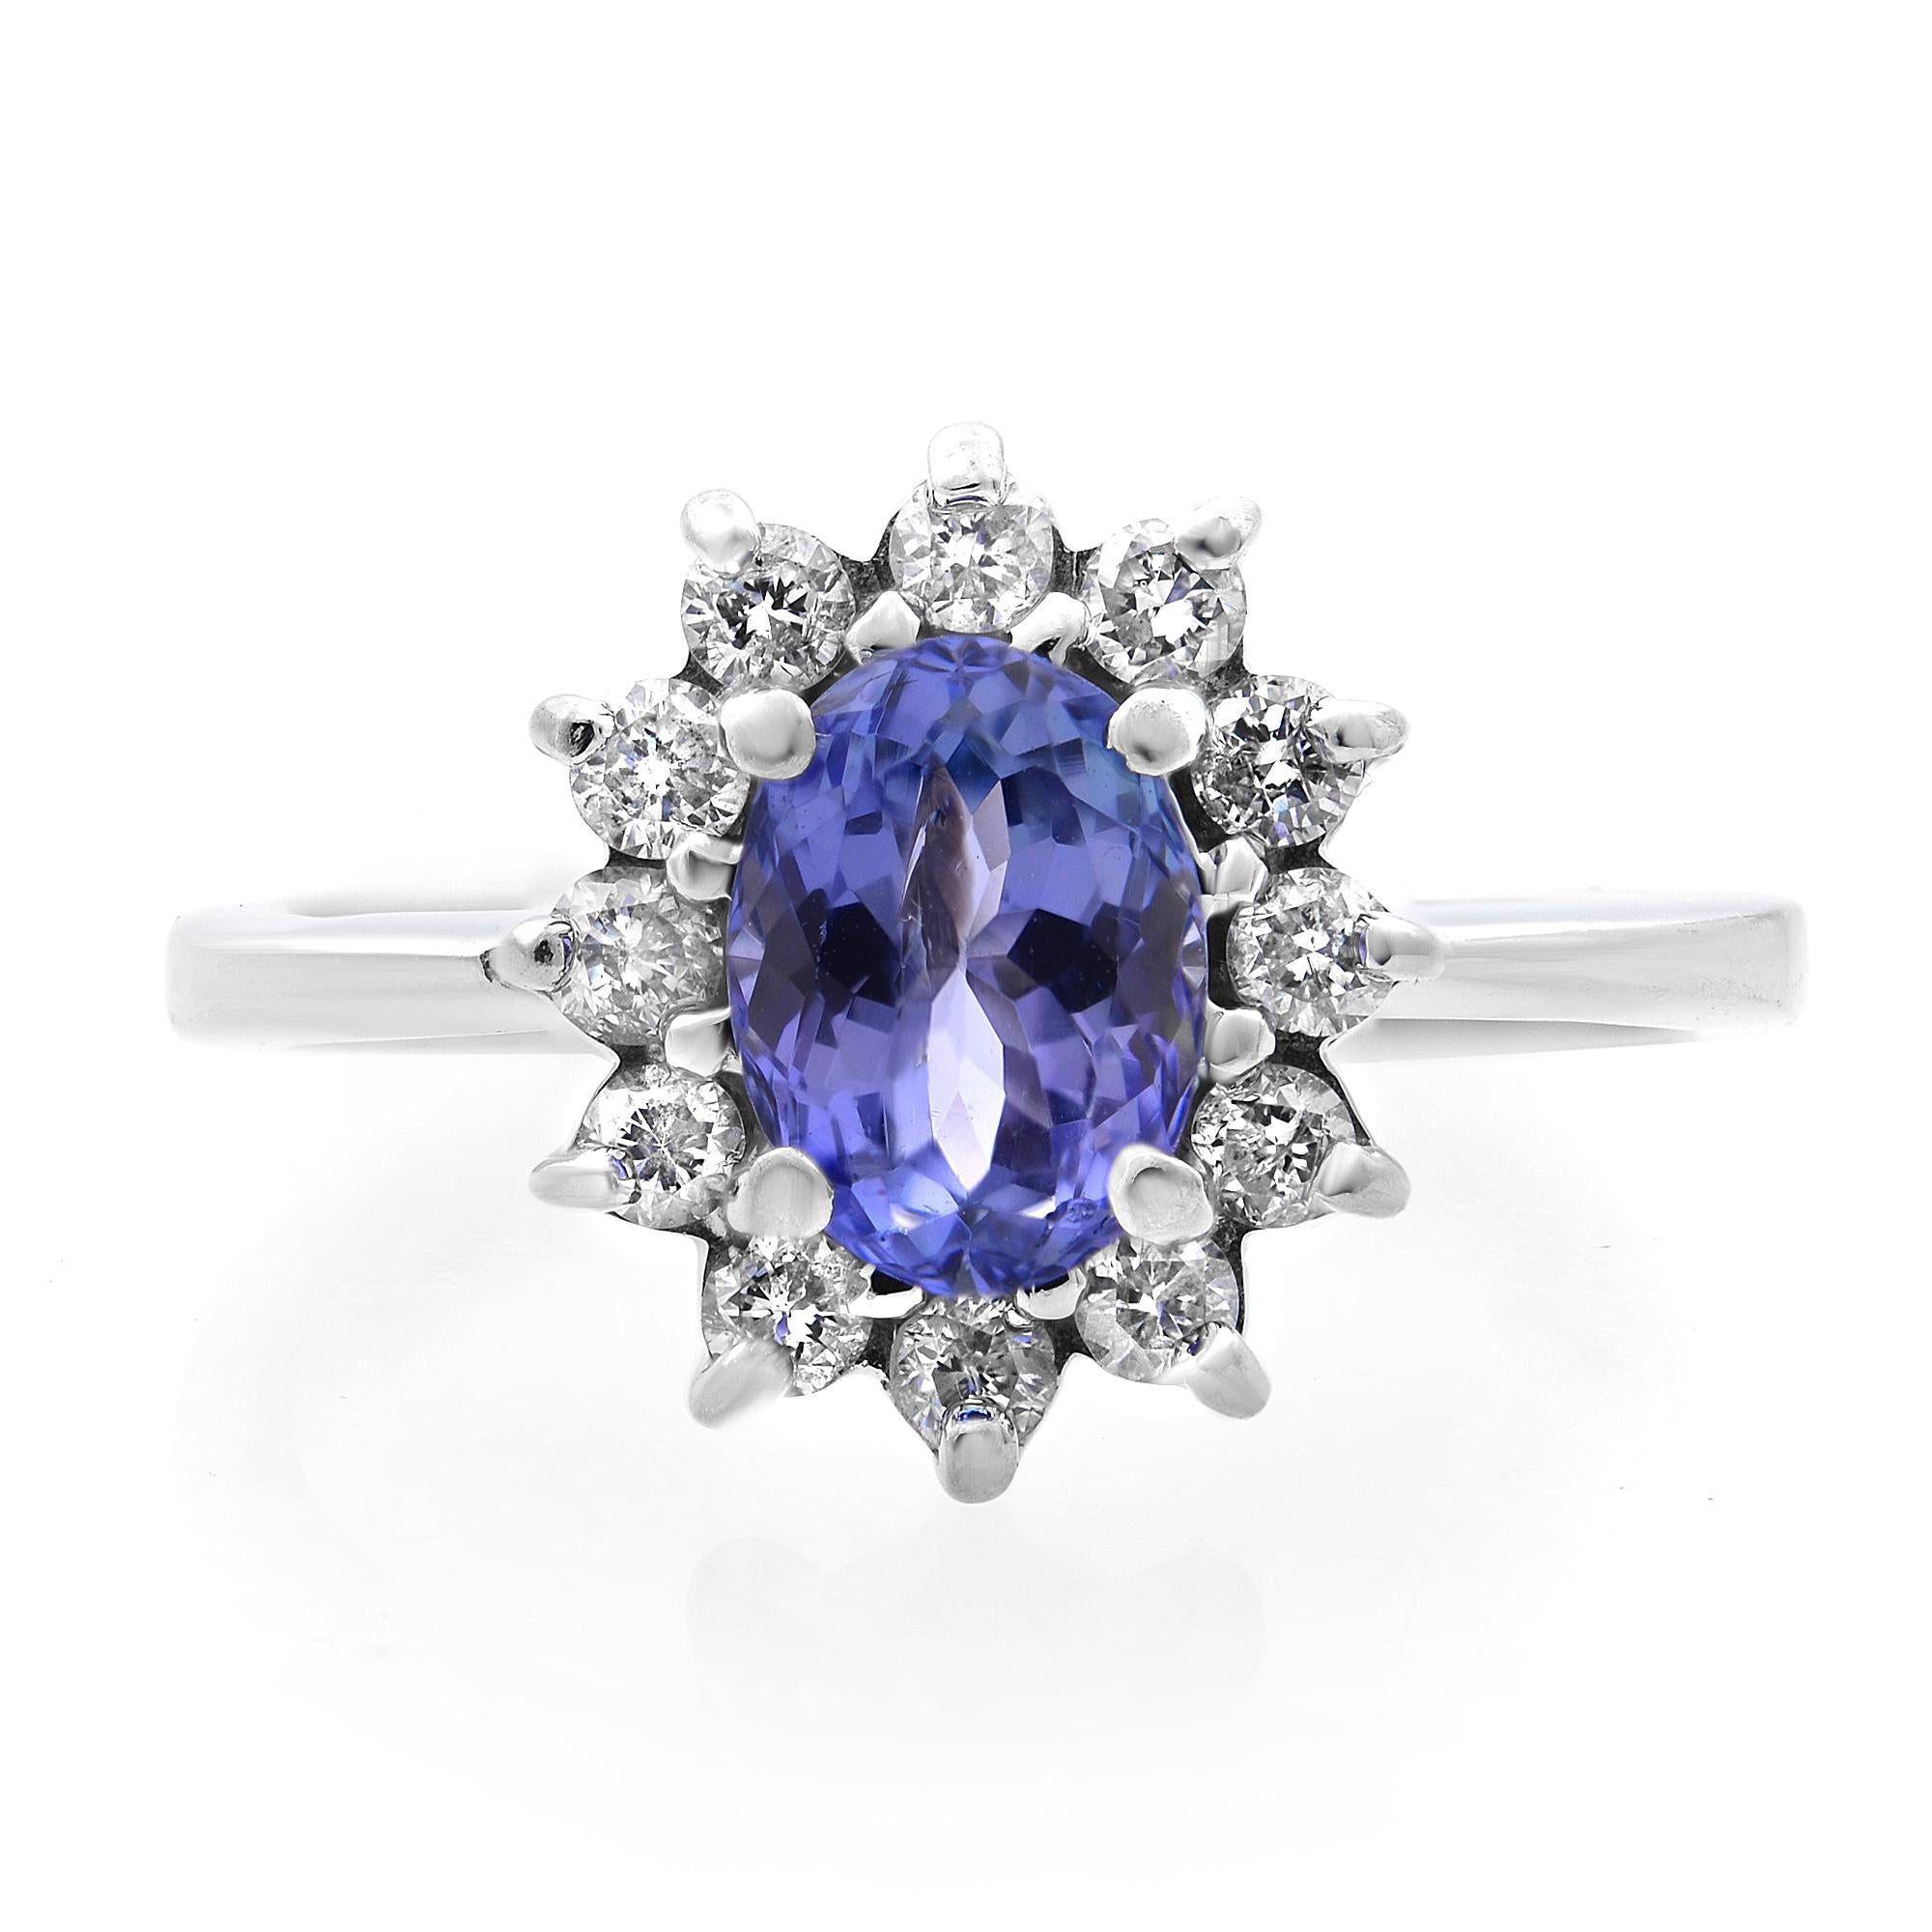 This stunning Tanzanite and diamond flowering halo engagement anniversary ring is encrusted with 1.00 carat blue tanzanite and encircled with 0.60 carat white round cut diamonds in 14k white gold setting. This timeless design is perfect as a